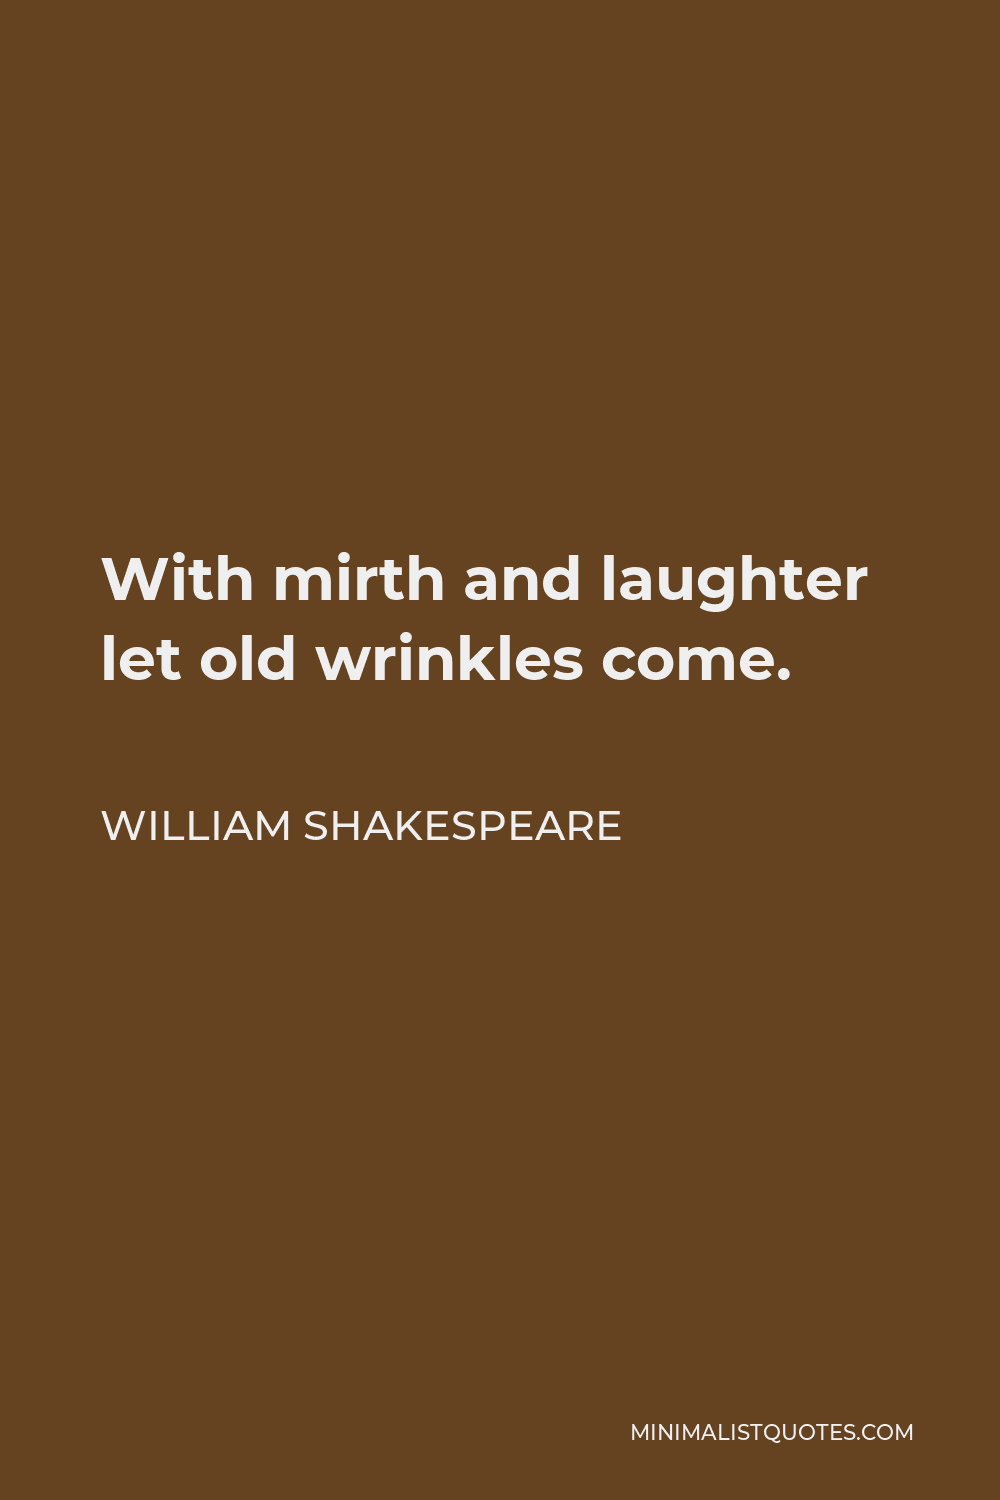 William Shakespeare Quote - With mirth and laughter let old wrinkles come.